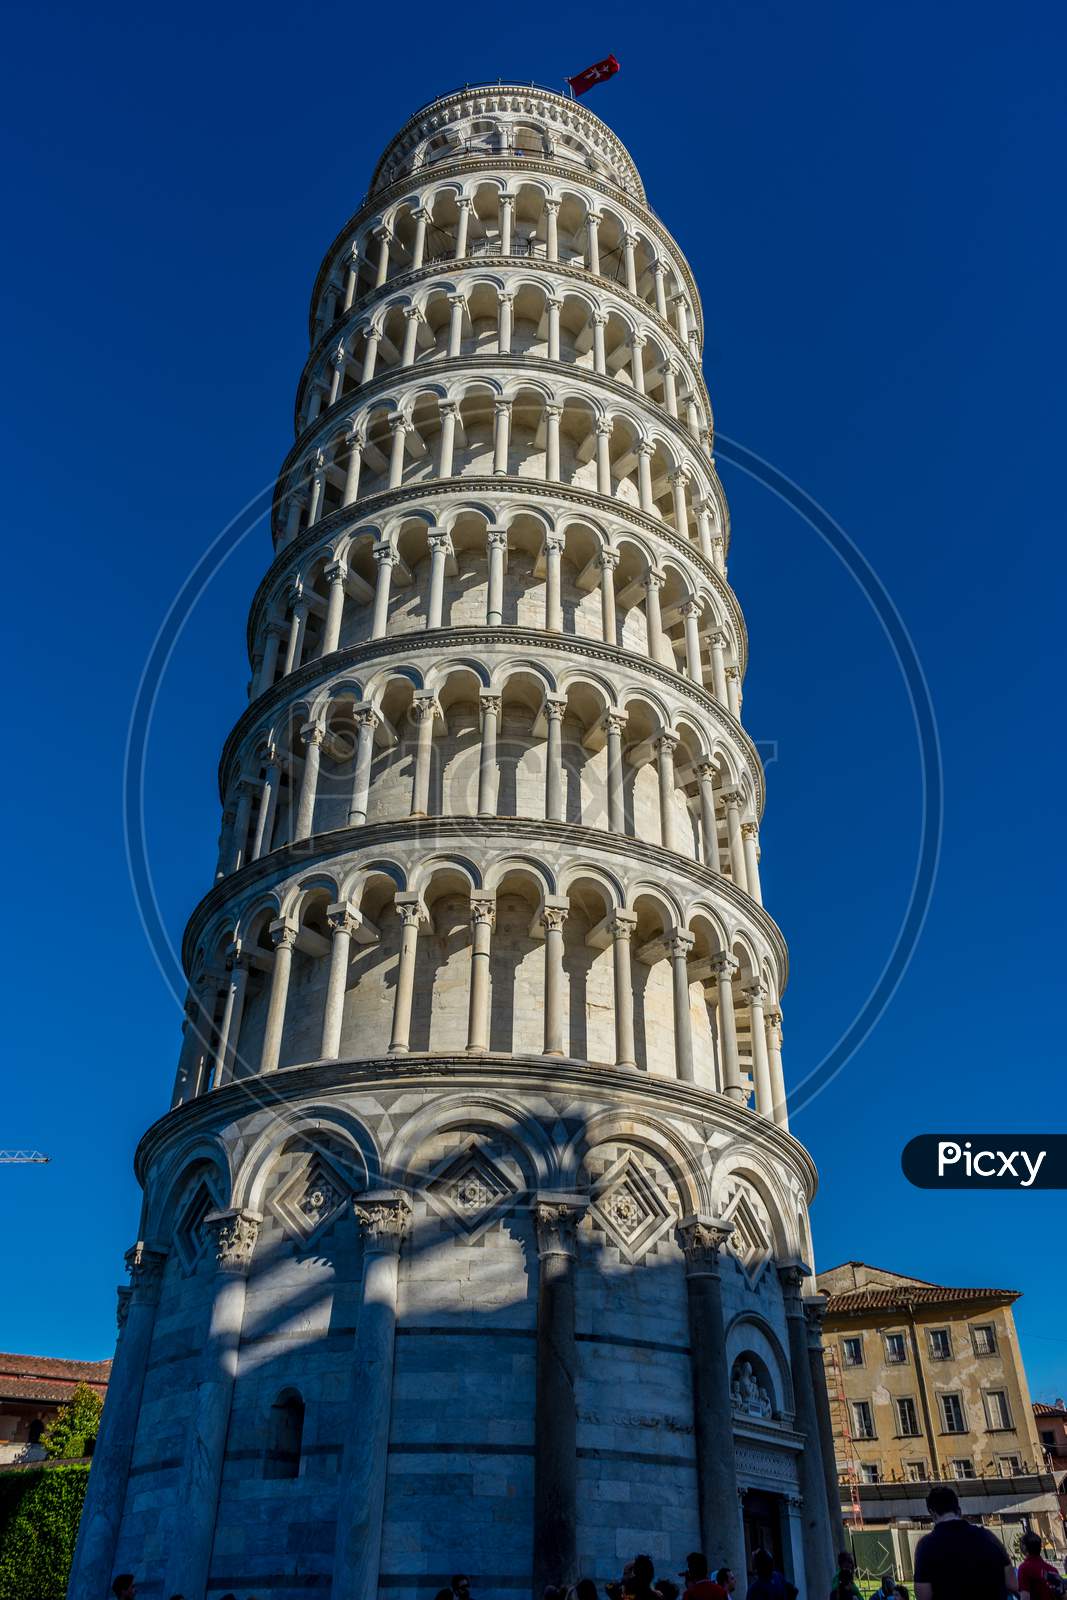 Pisa, Italy - 25 June 2018: Tourists At The Leaning Tower Of Pisa In Tuscany, Italy